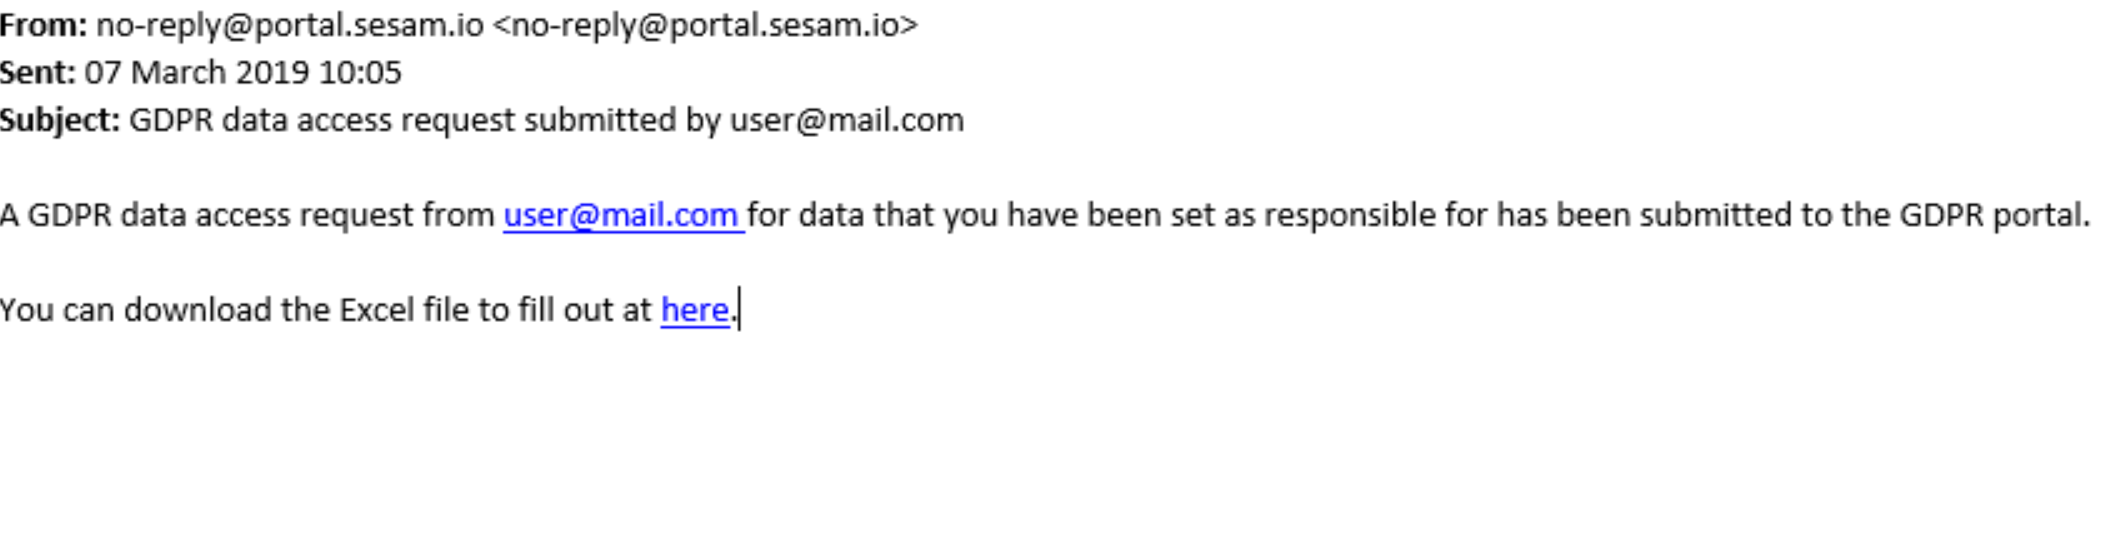 Data request email sent to system owner